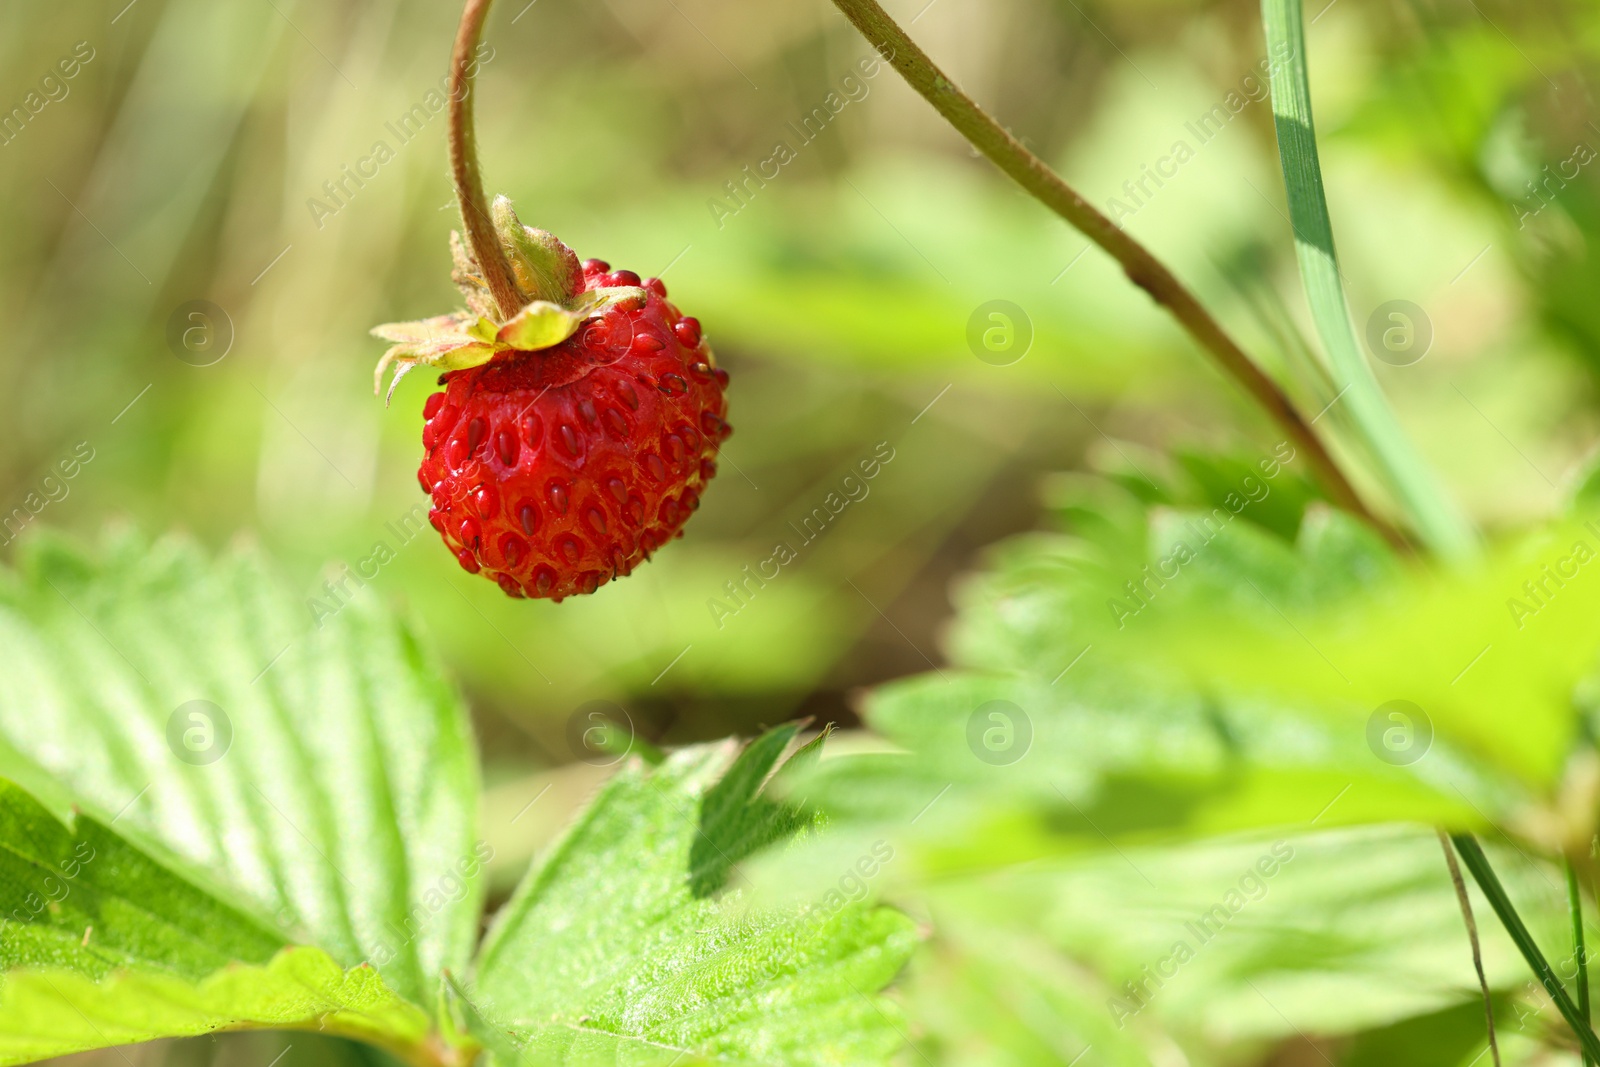 Photo of One small wild strawberry and leaves growing outdoors